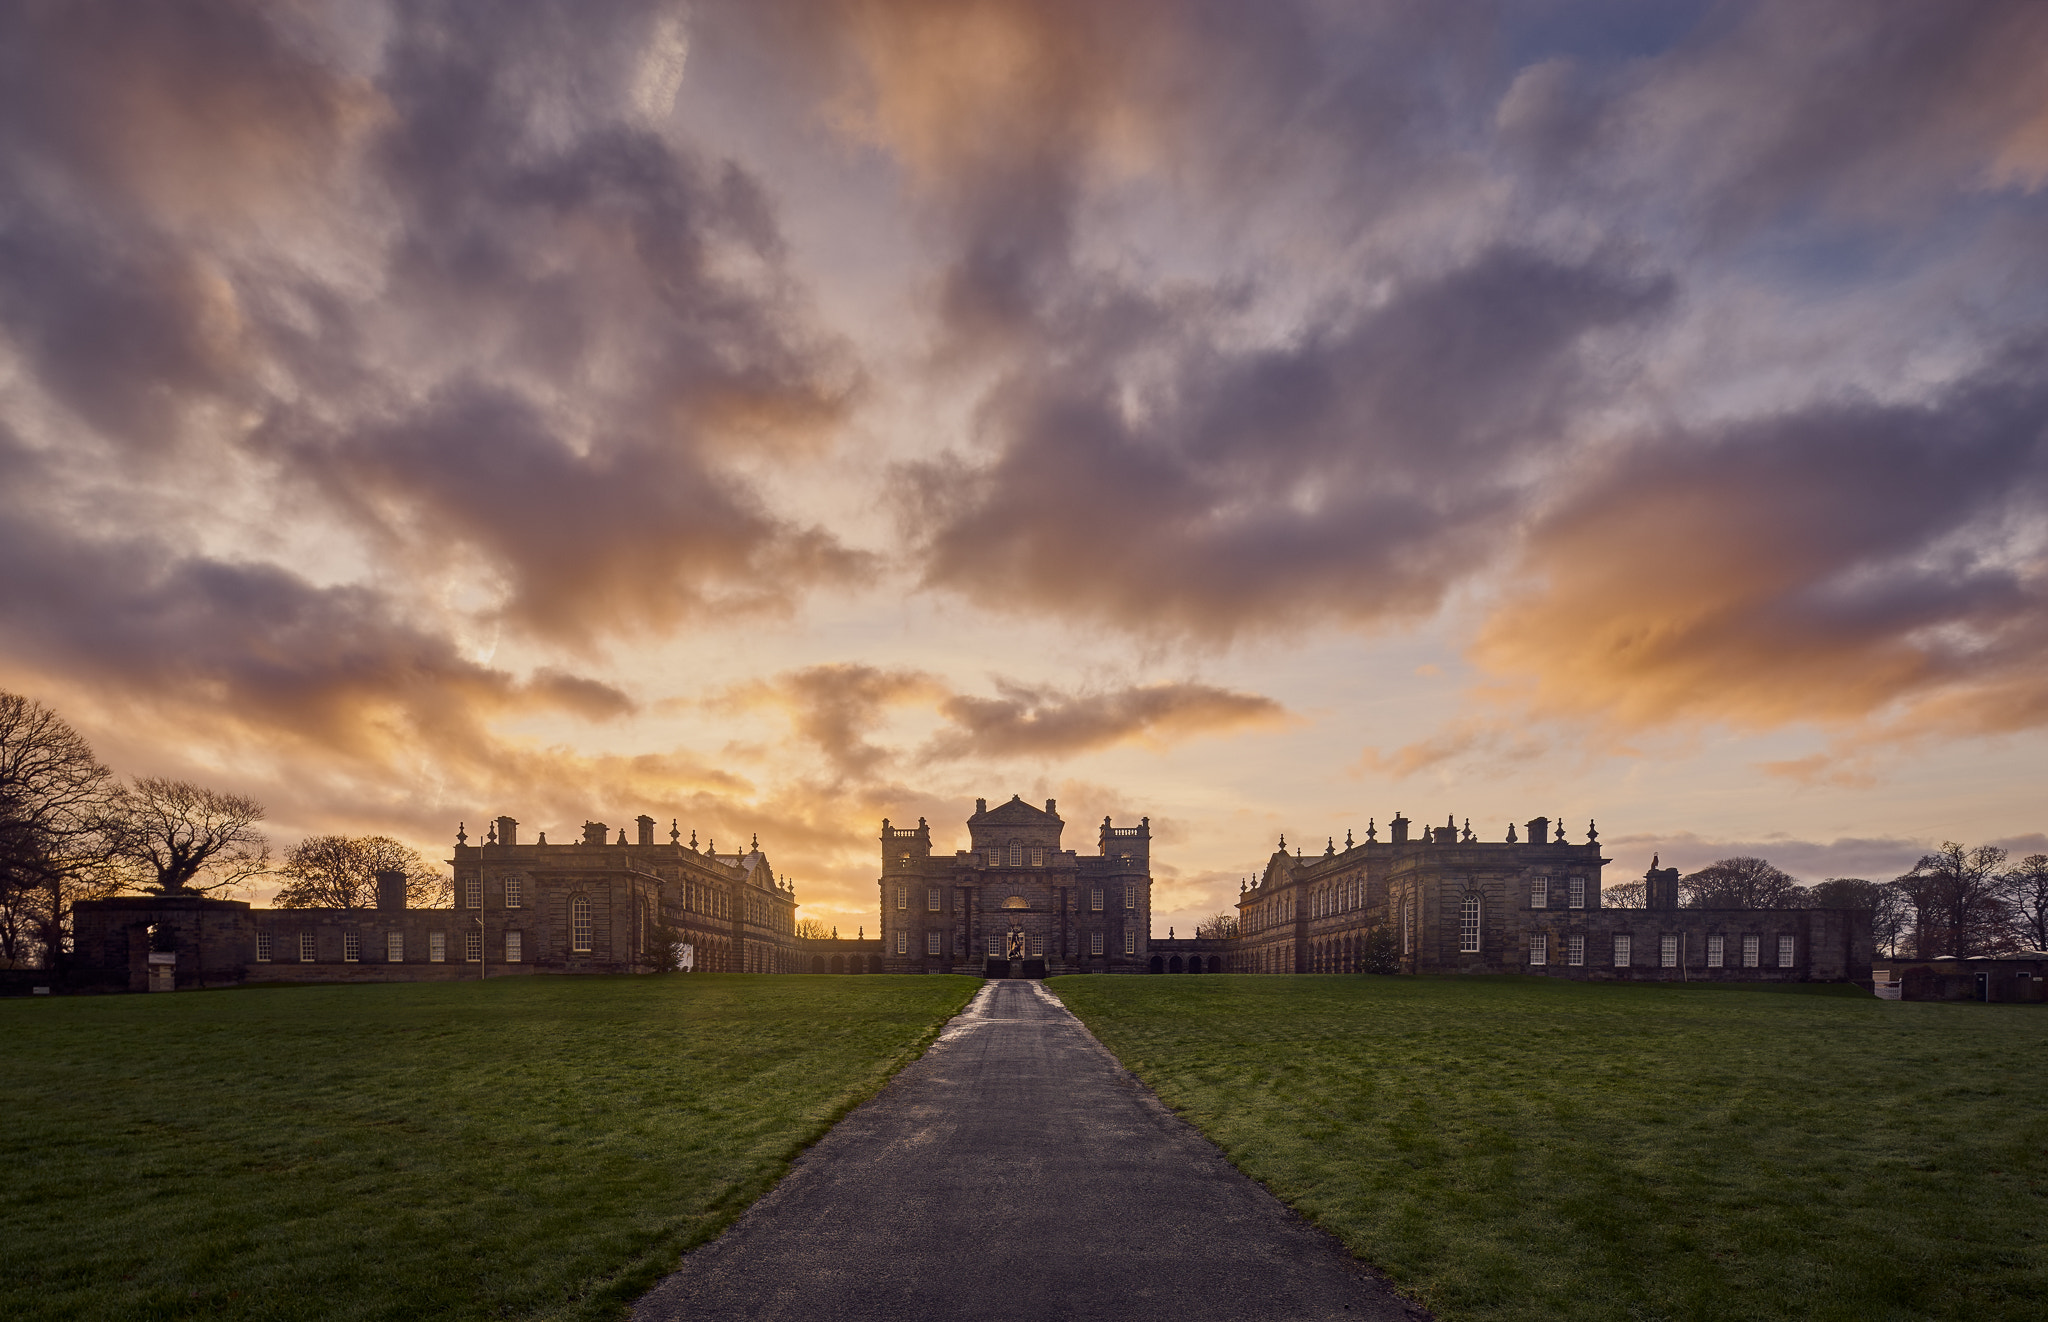 17mm F4 G sample photo. Sunrise over seaton delaval hall photography